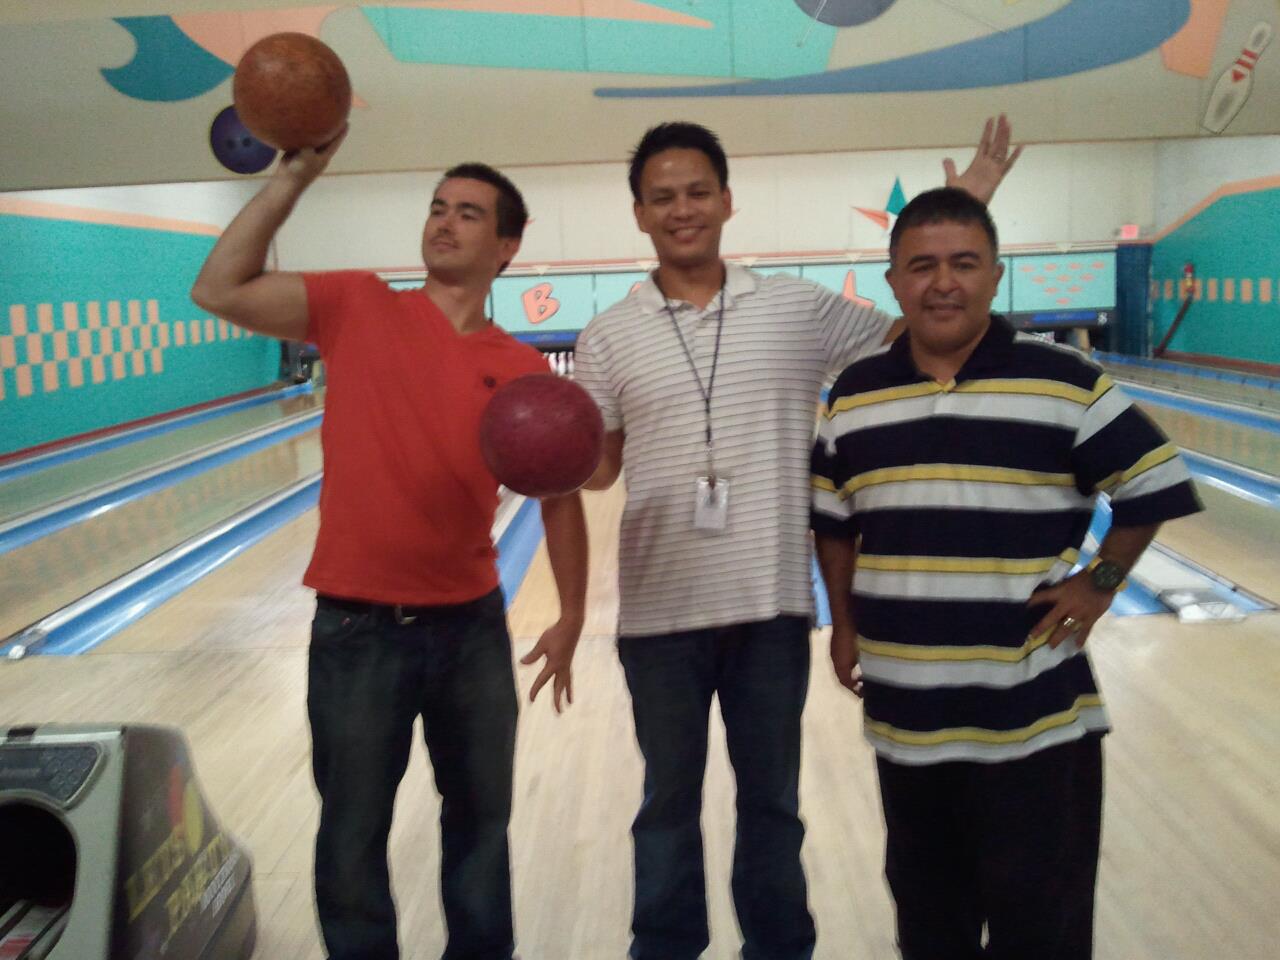 Tully Rankin, Michael Soriano, and Marty Romero at Montrose Bowl.